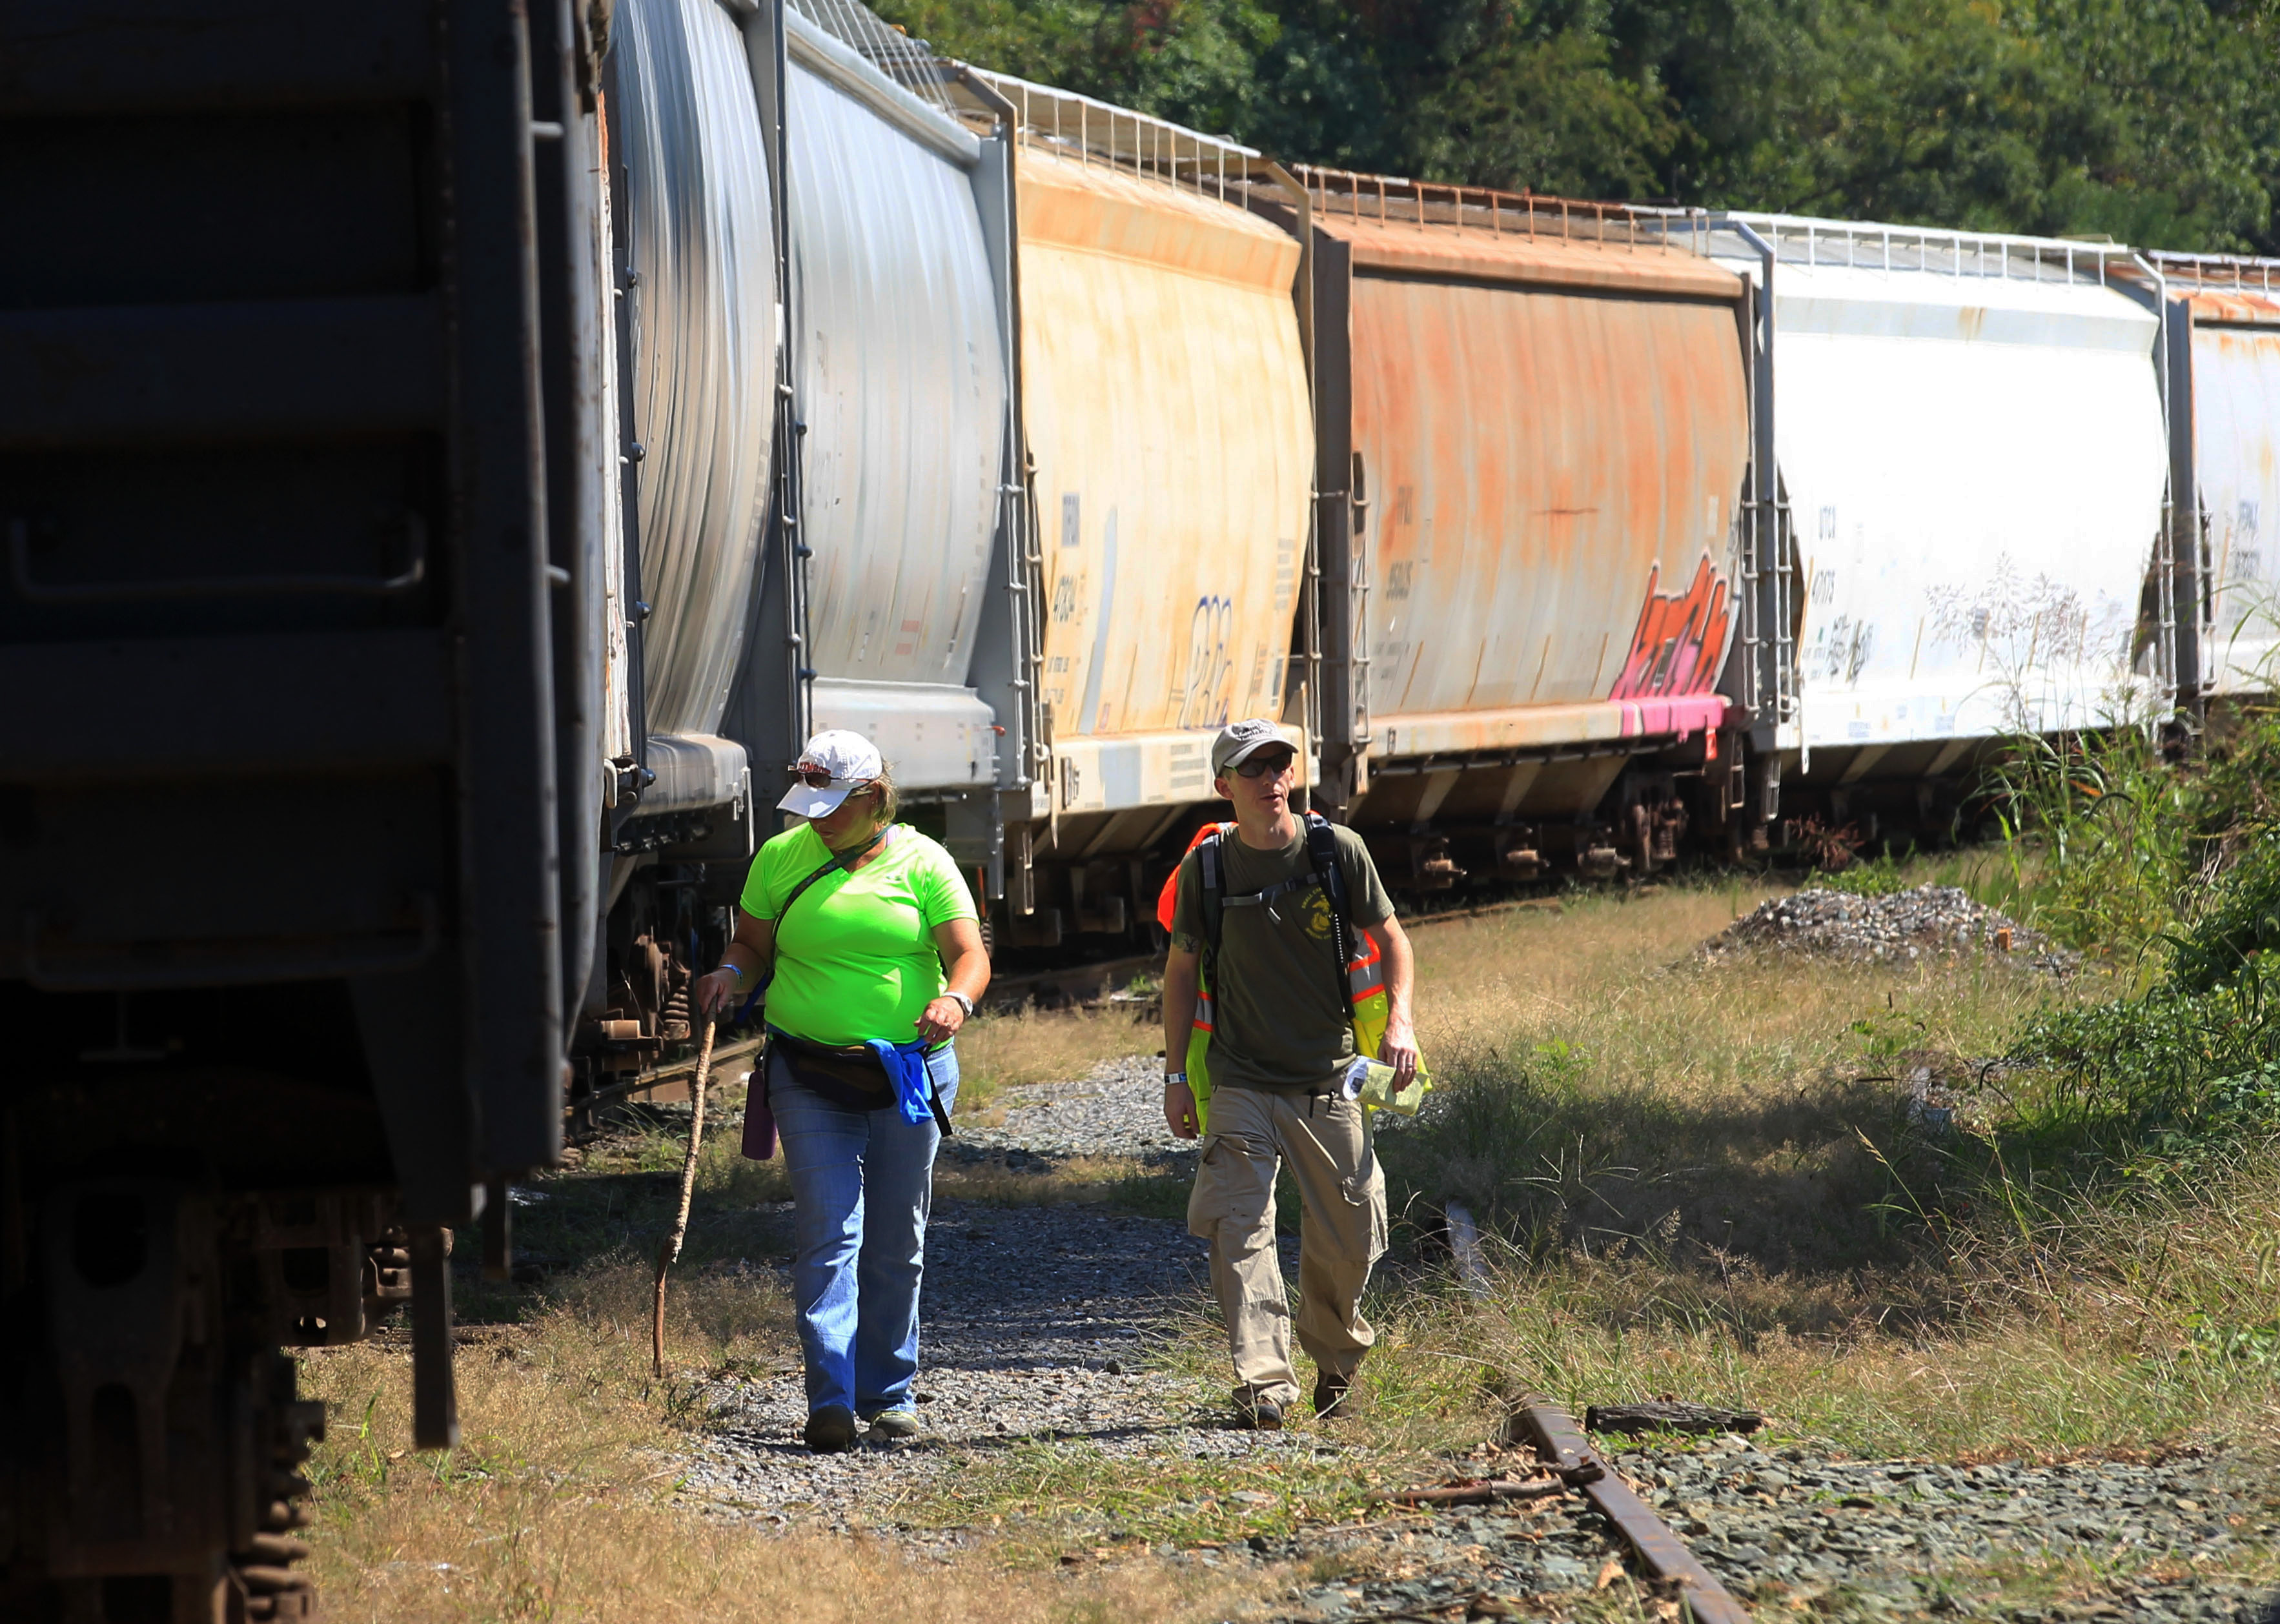 Volunteer Linda Cassell, left, walks with search team leader Brian Pace, as they search along the railroad tracks behind the Charlottesville Downtown Mall during a massive search effort by the community for missing University of Virginia student Hannah Graham, Sept. 20, 2014, in Charlottesville, Va. (Andrew Shurtleff—The Daily Progress/AP)